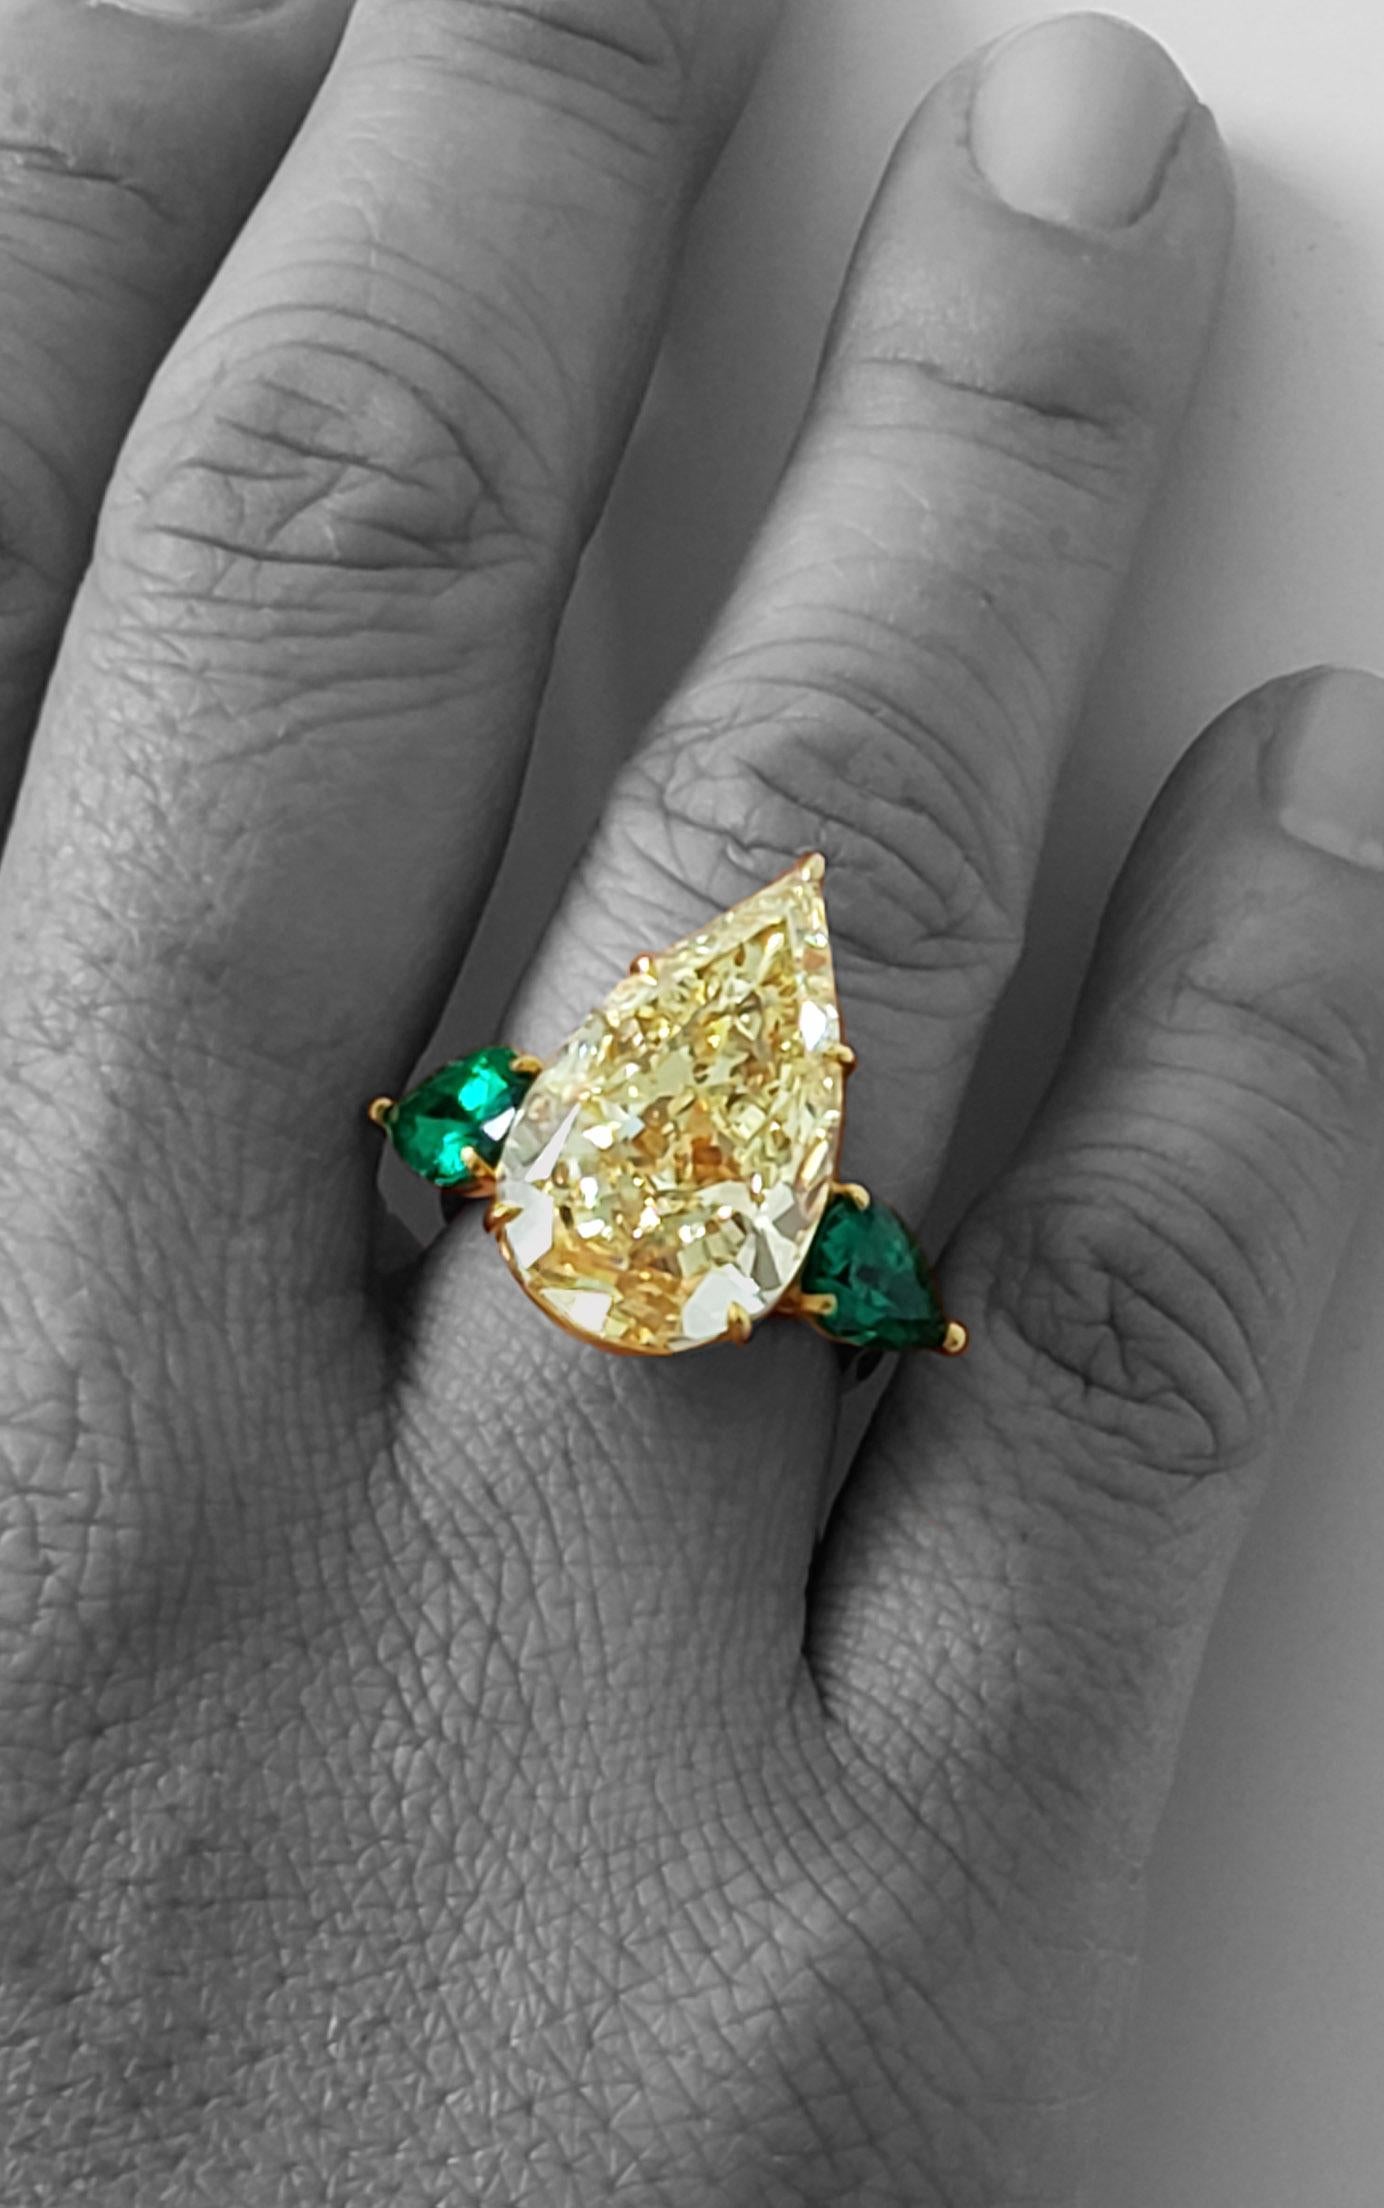 Scarselli Ring 14 Carat Pear Shape Yellow Diamond with Emeralds 1